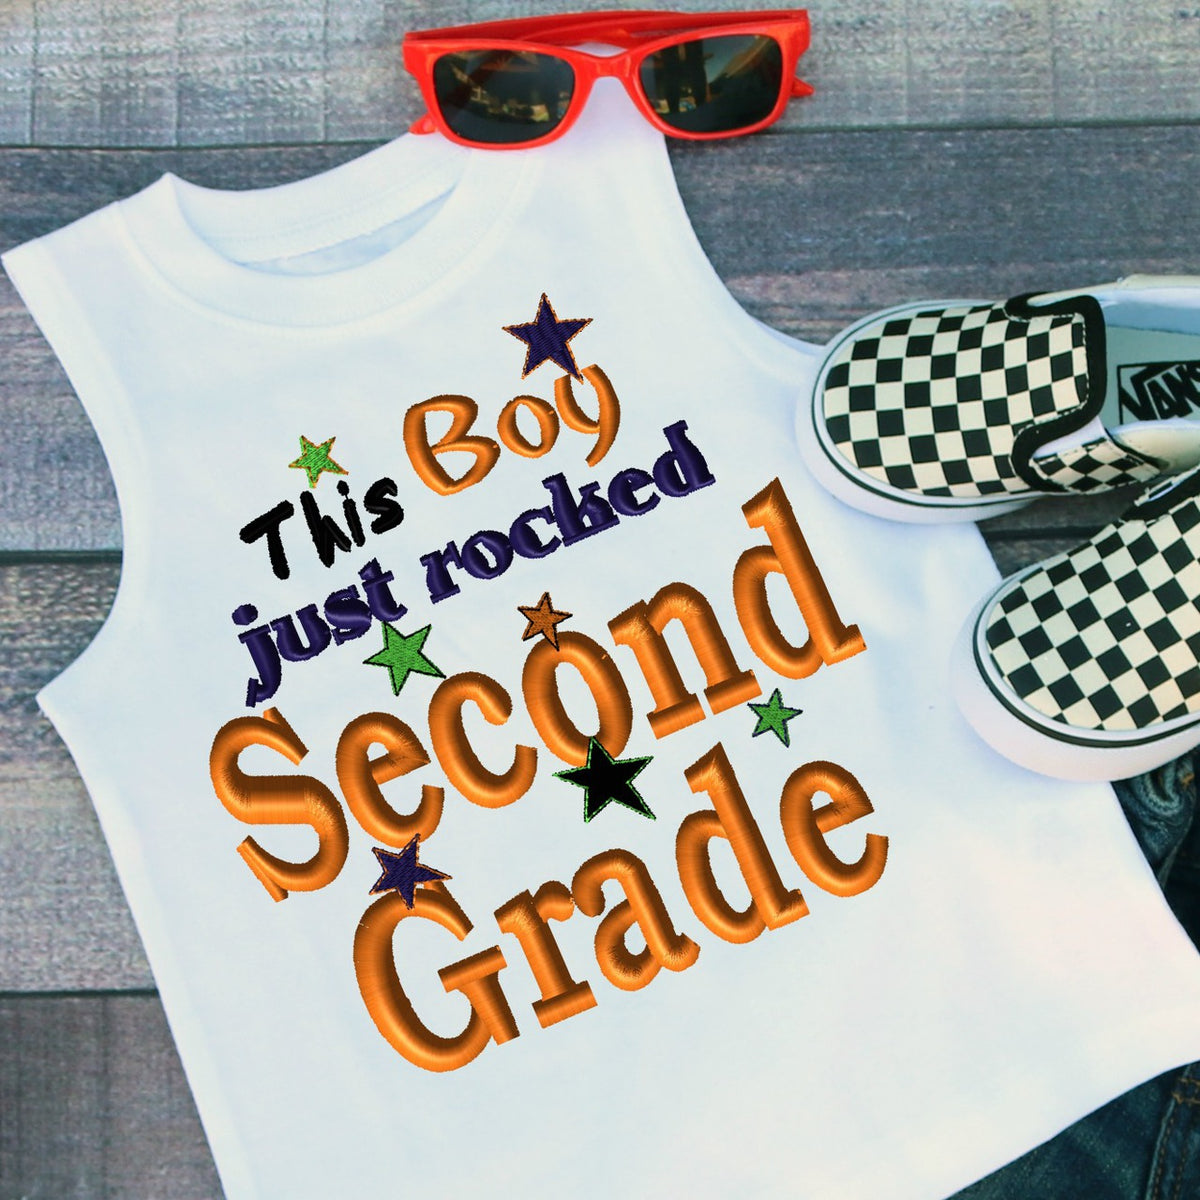 This Boy Just Rocked Second Grade Applique Embroidery Design - Ellie and Mac, Digital (PDF) Sewing Patterns | USA, Canada, UK, Australia